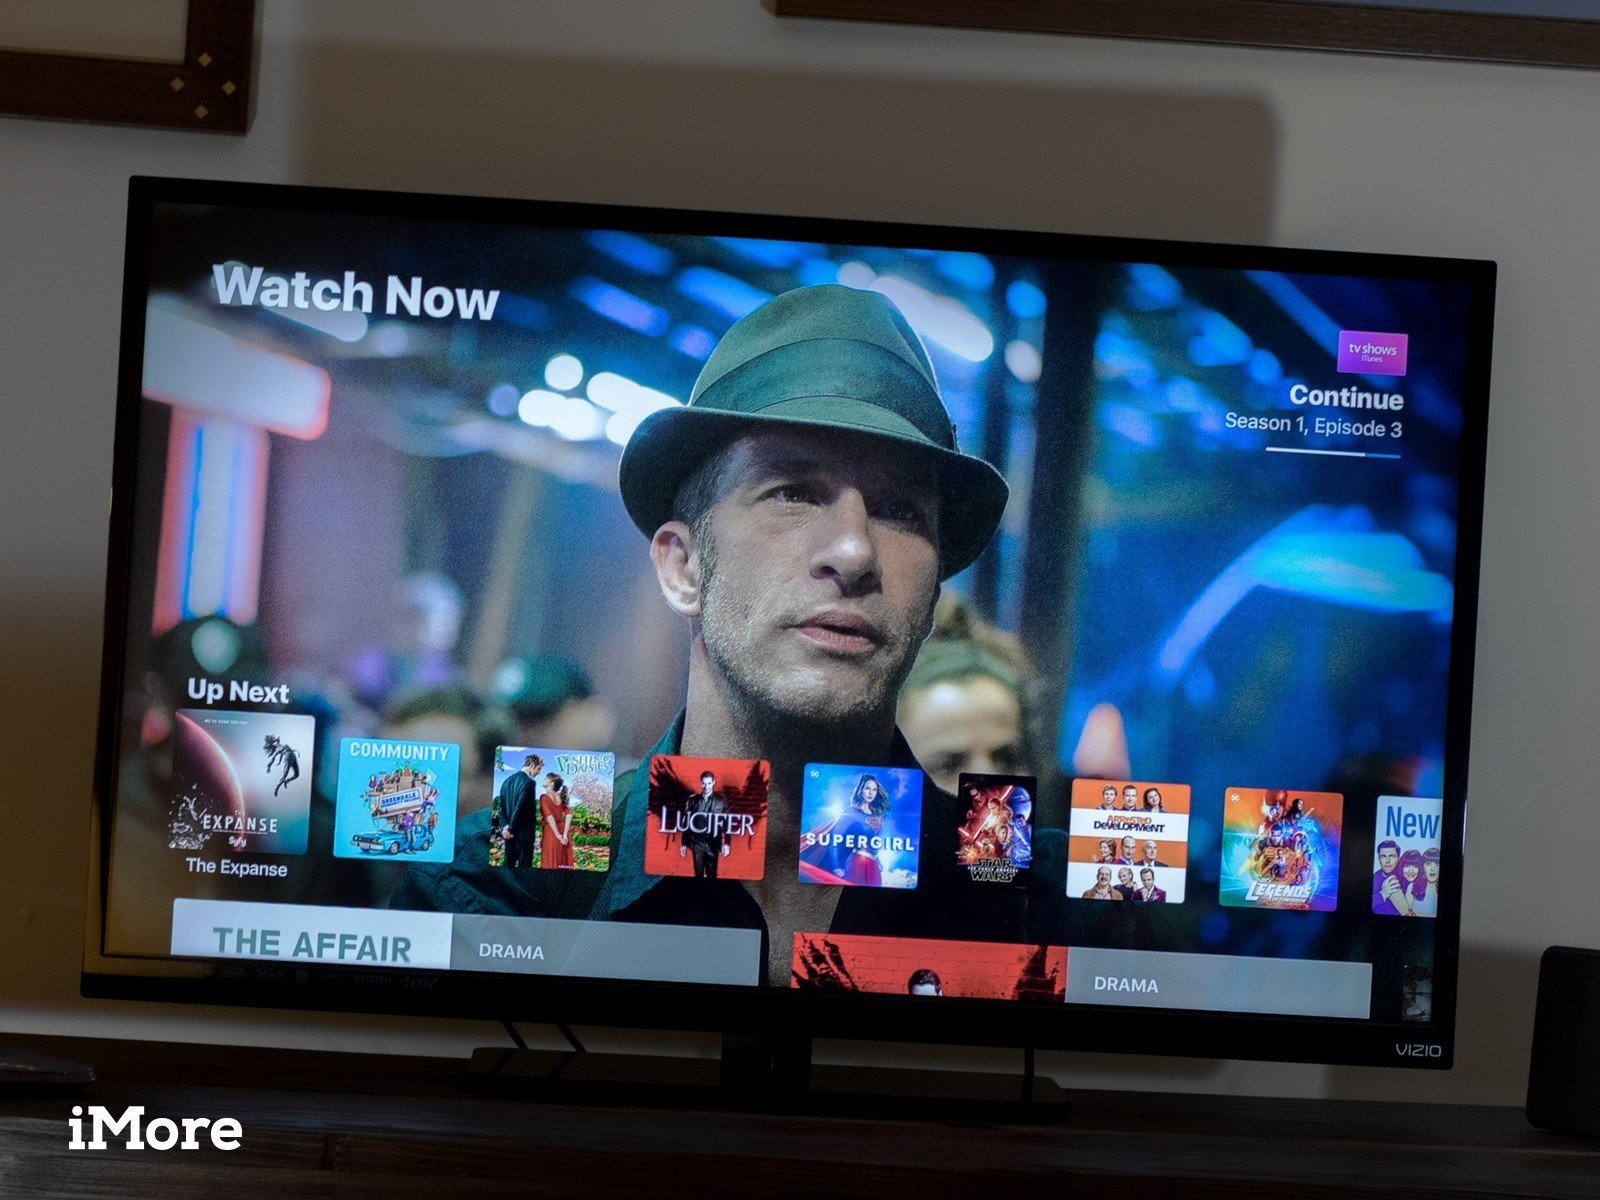 How to watch movies and TV shows on Apple TV